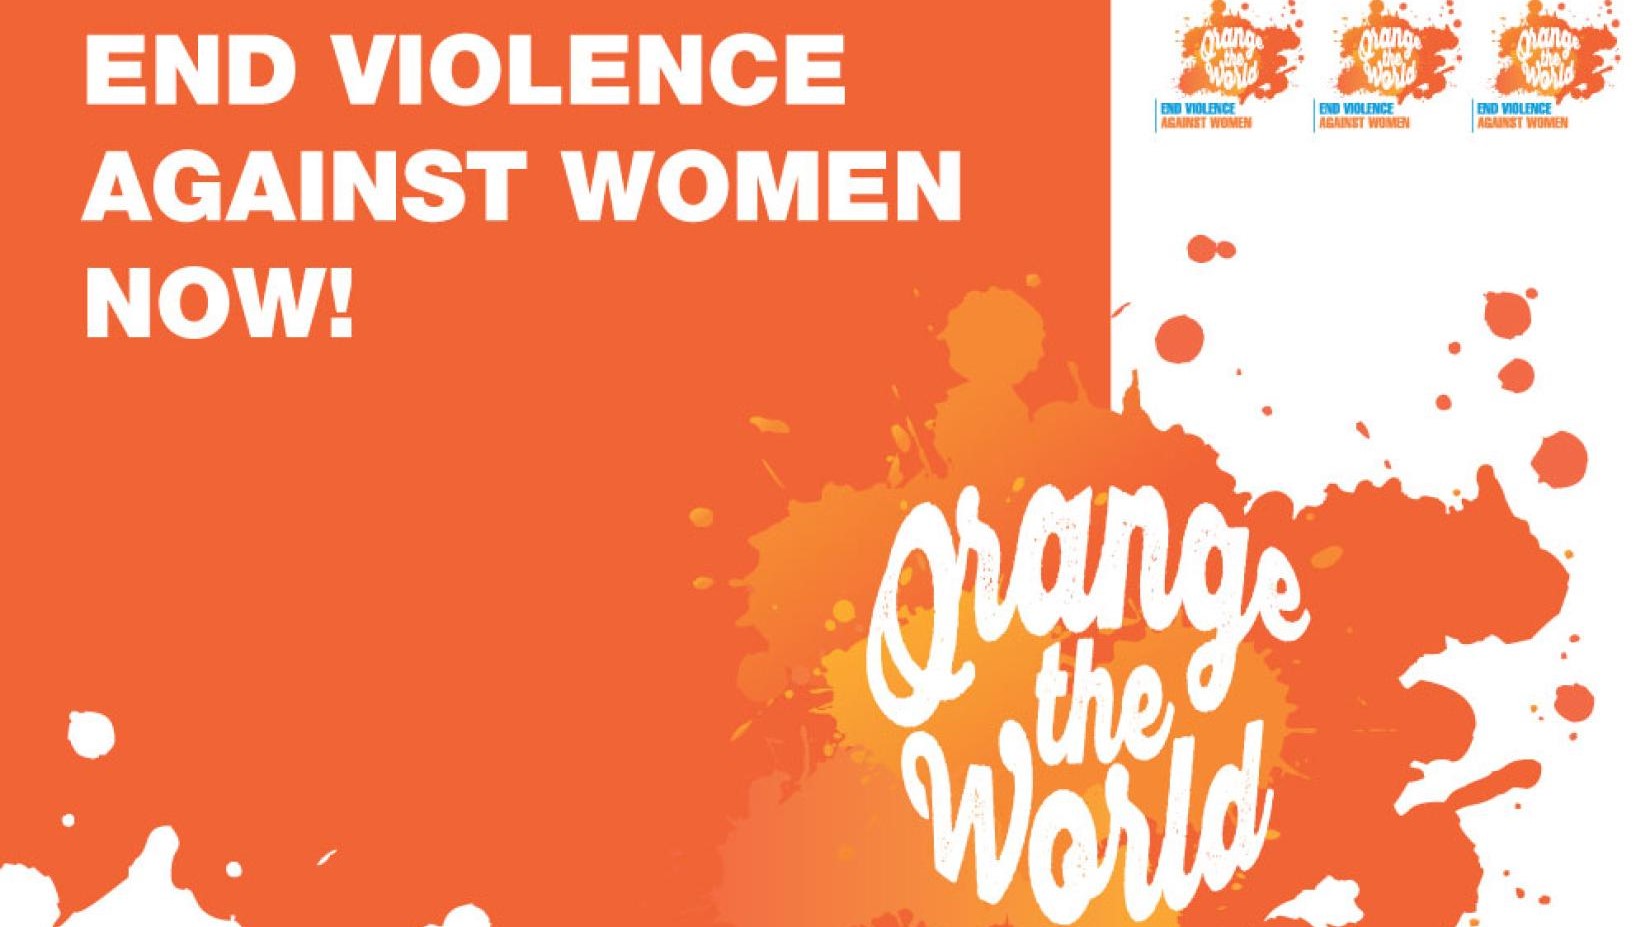 Time to end violence against women and girls in Georgia